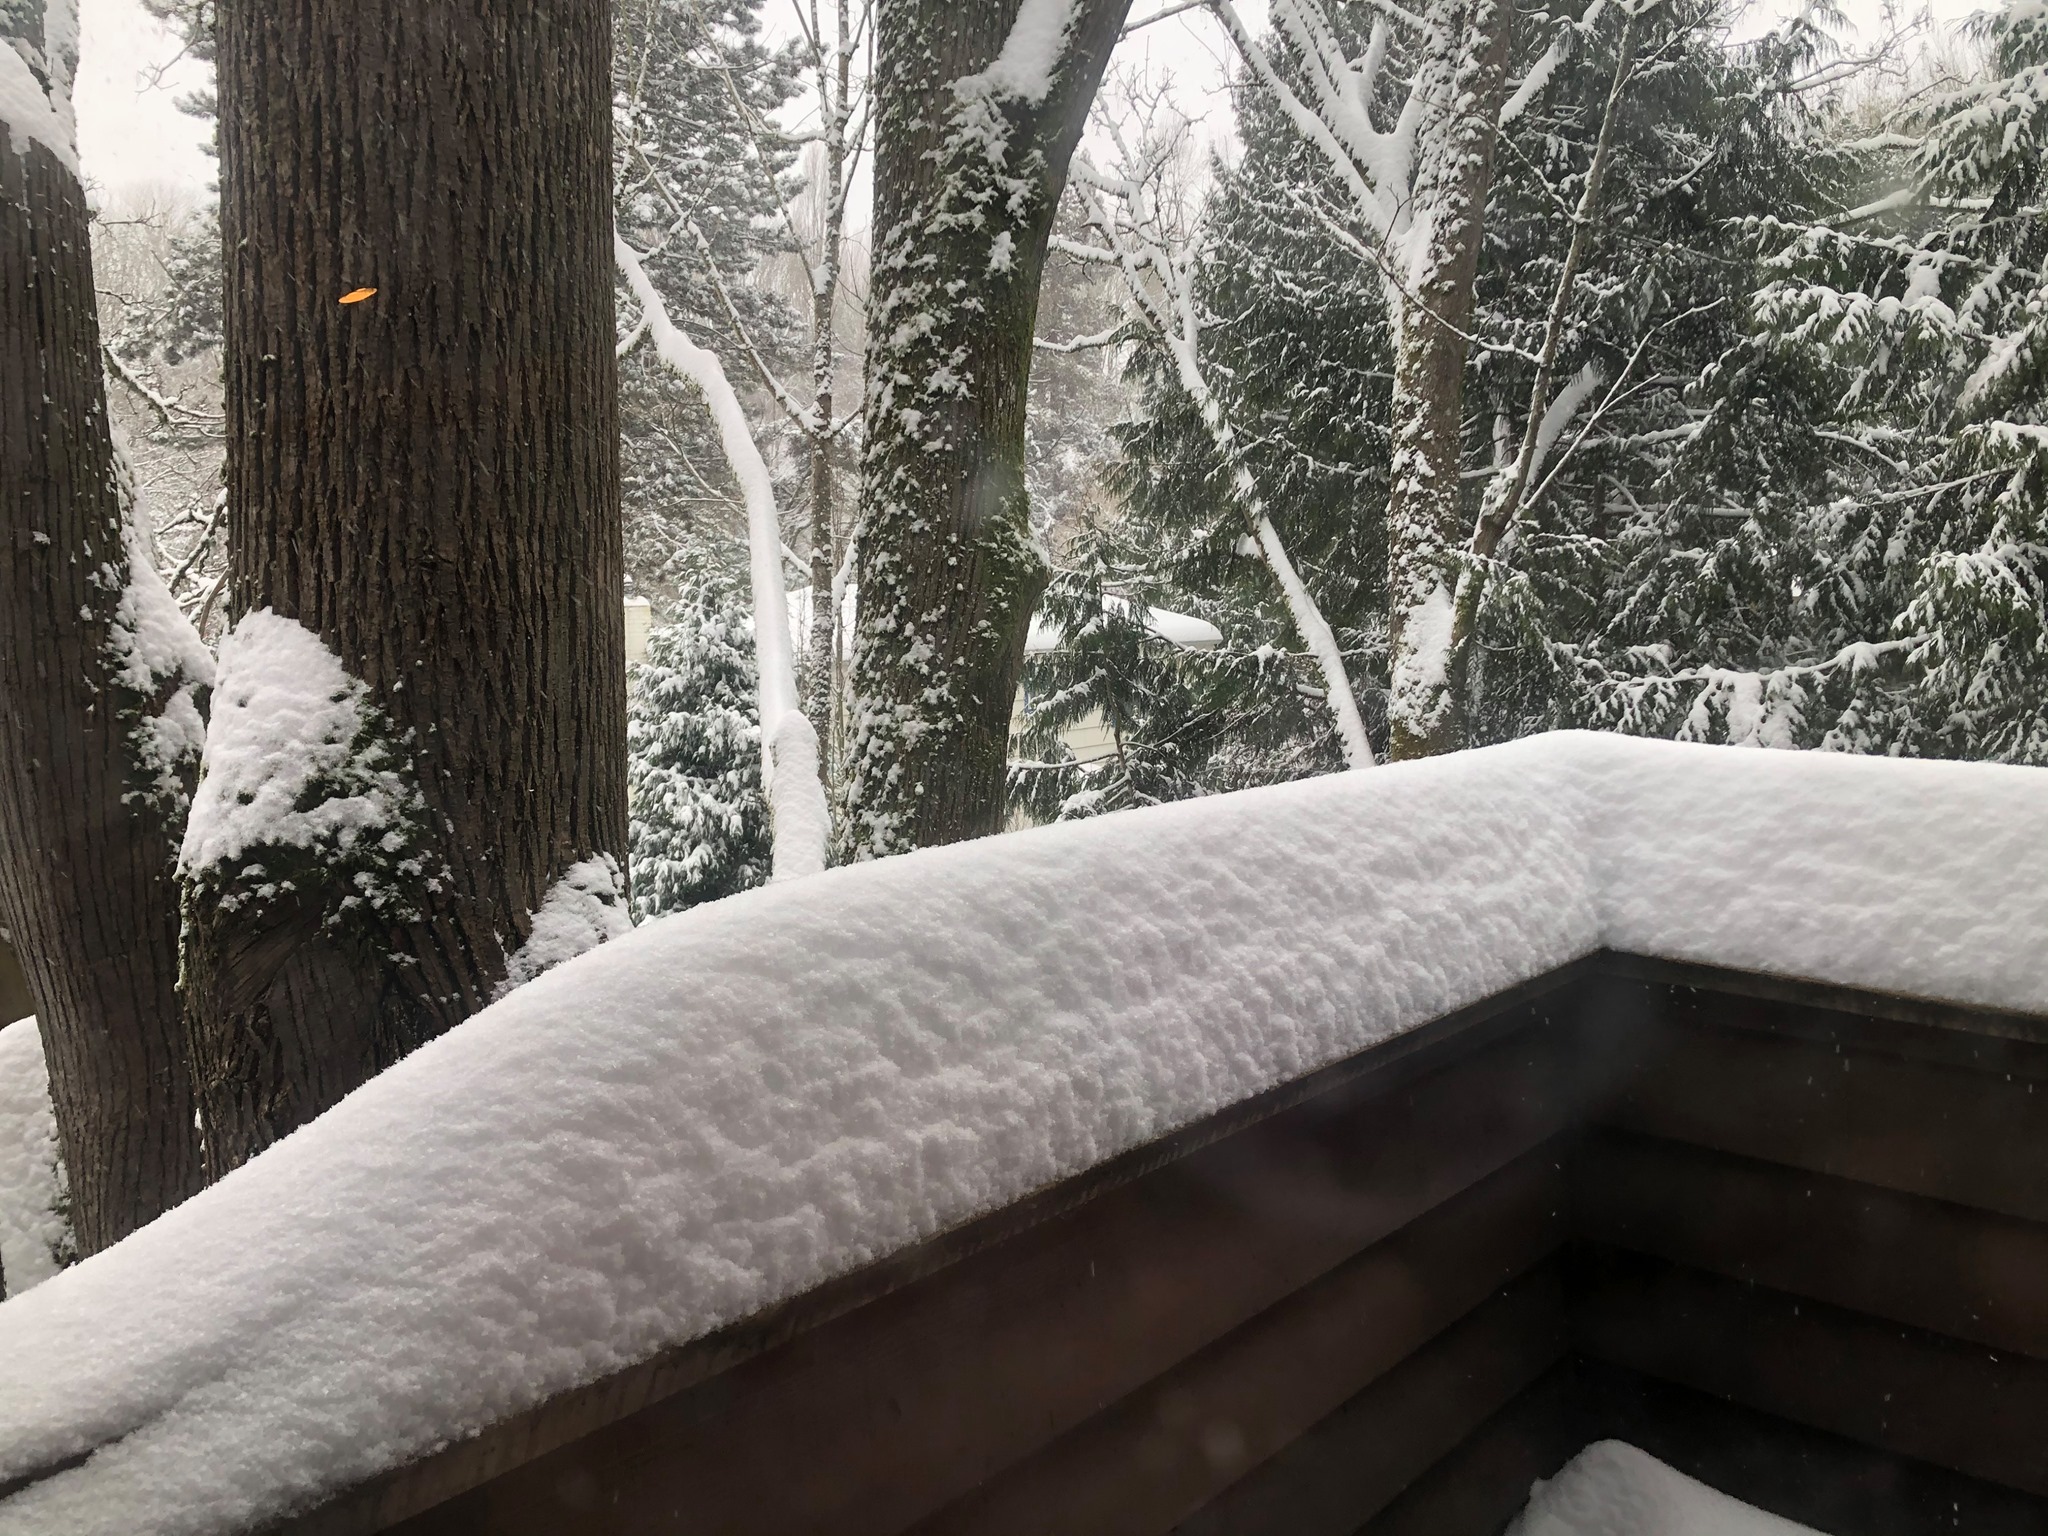 Seattle doesn’t get a lot of snow